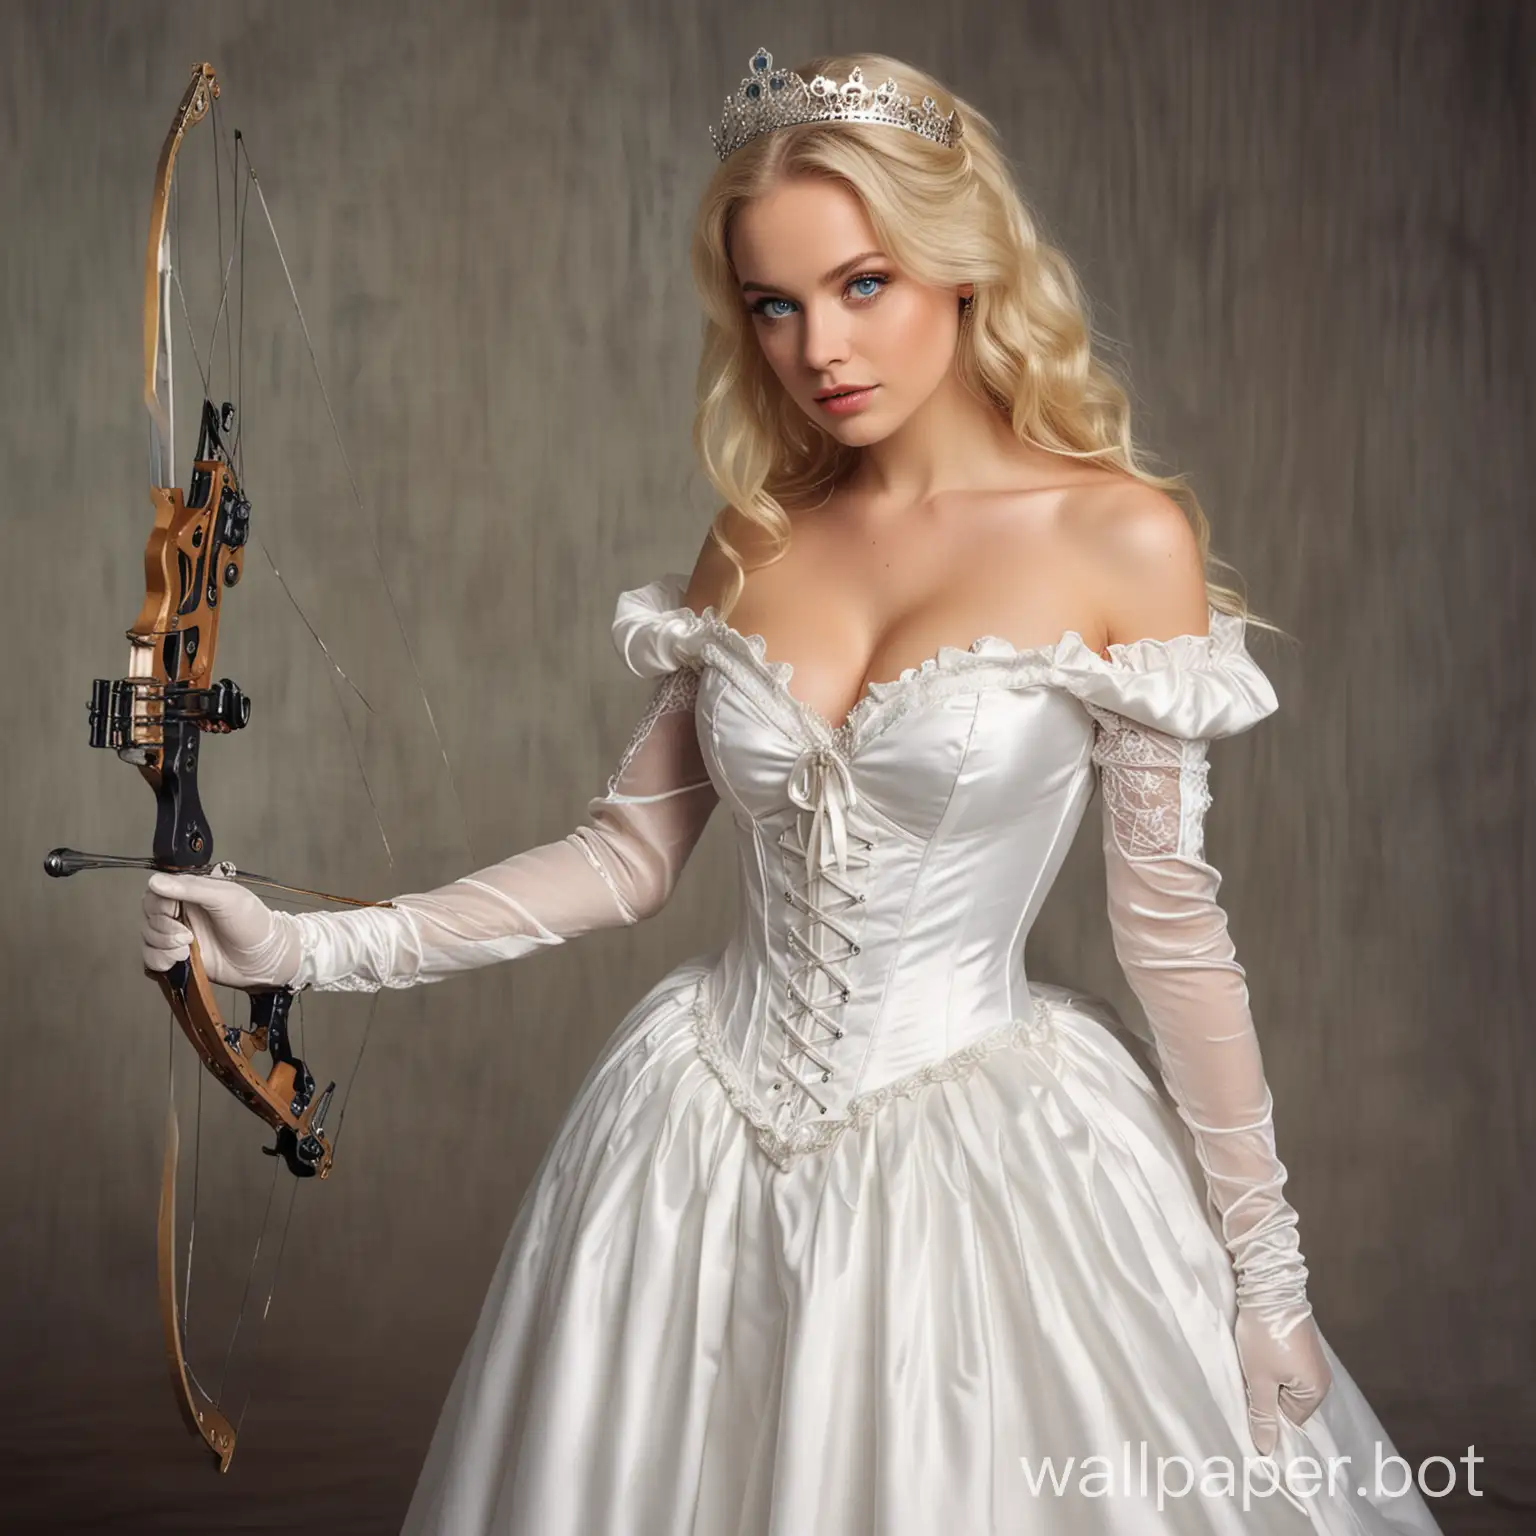 Regal-Queen-in-Elegant-White-Silk-Gown-with-Crossbow